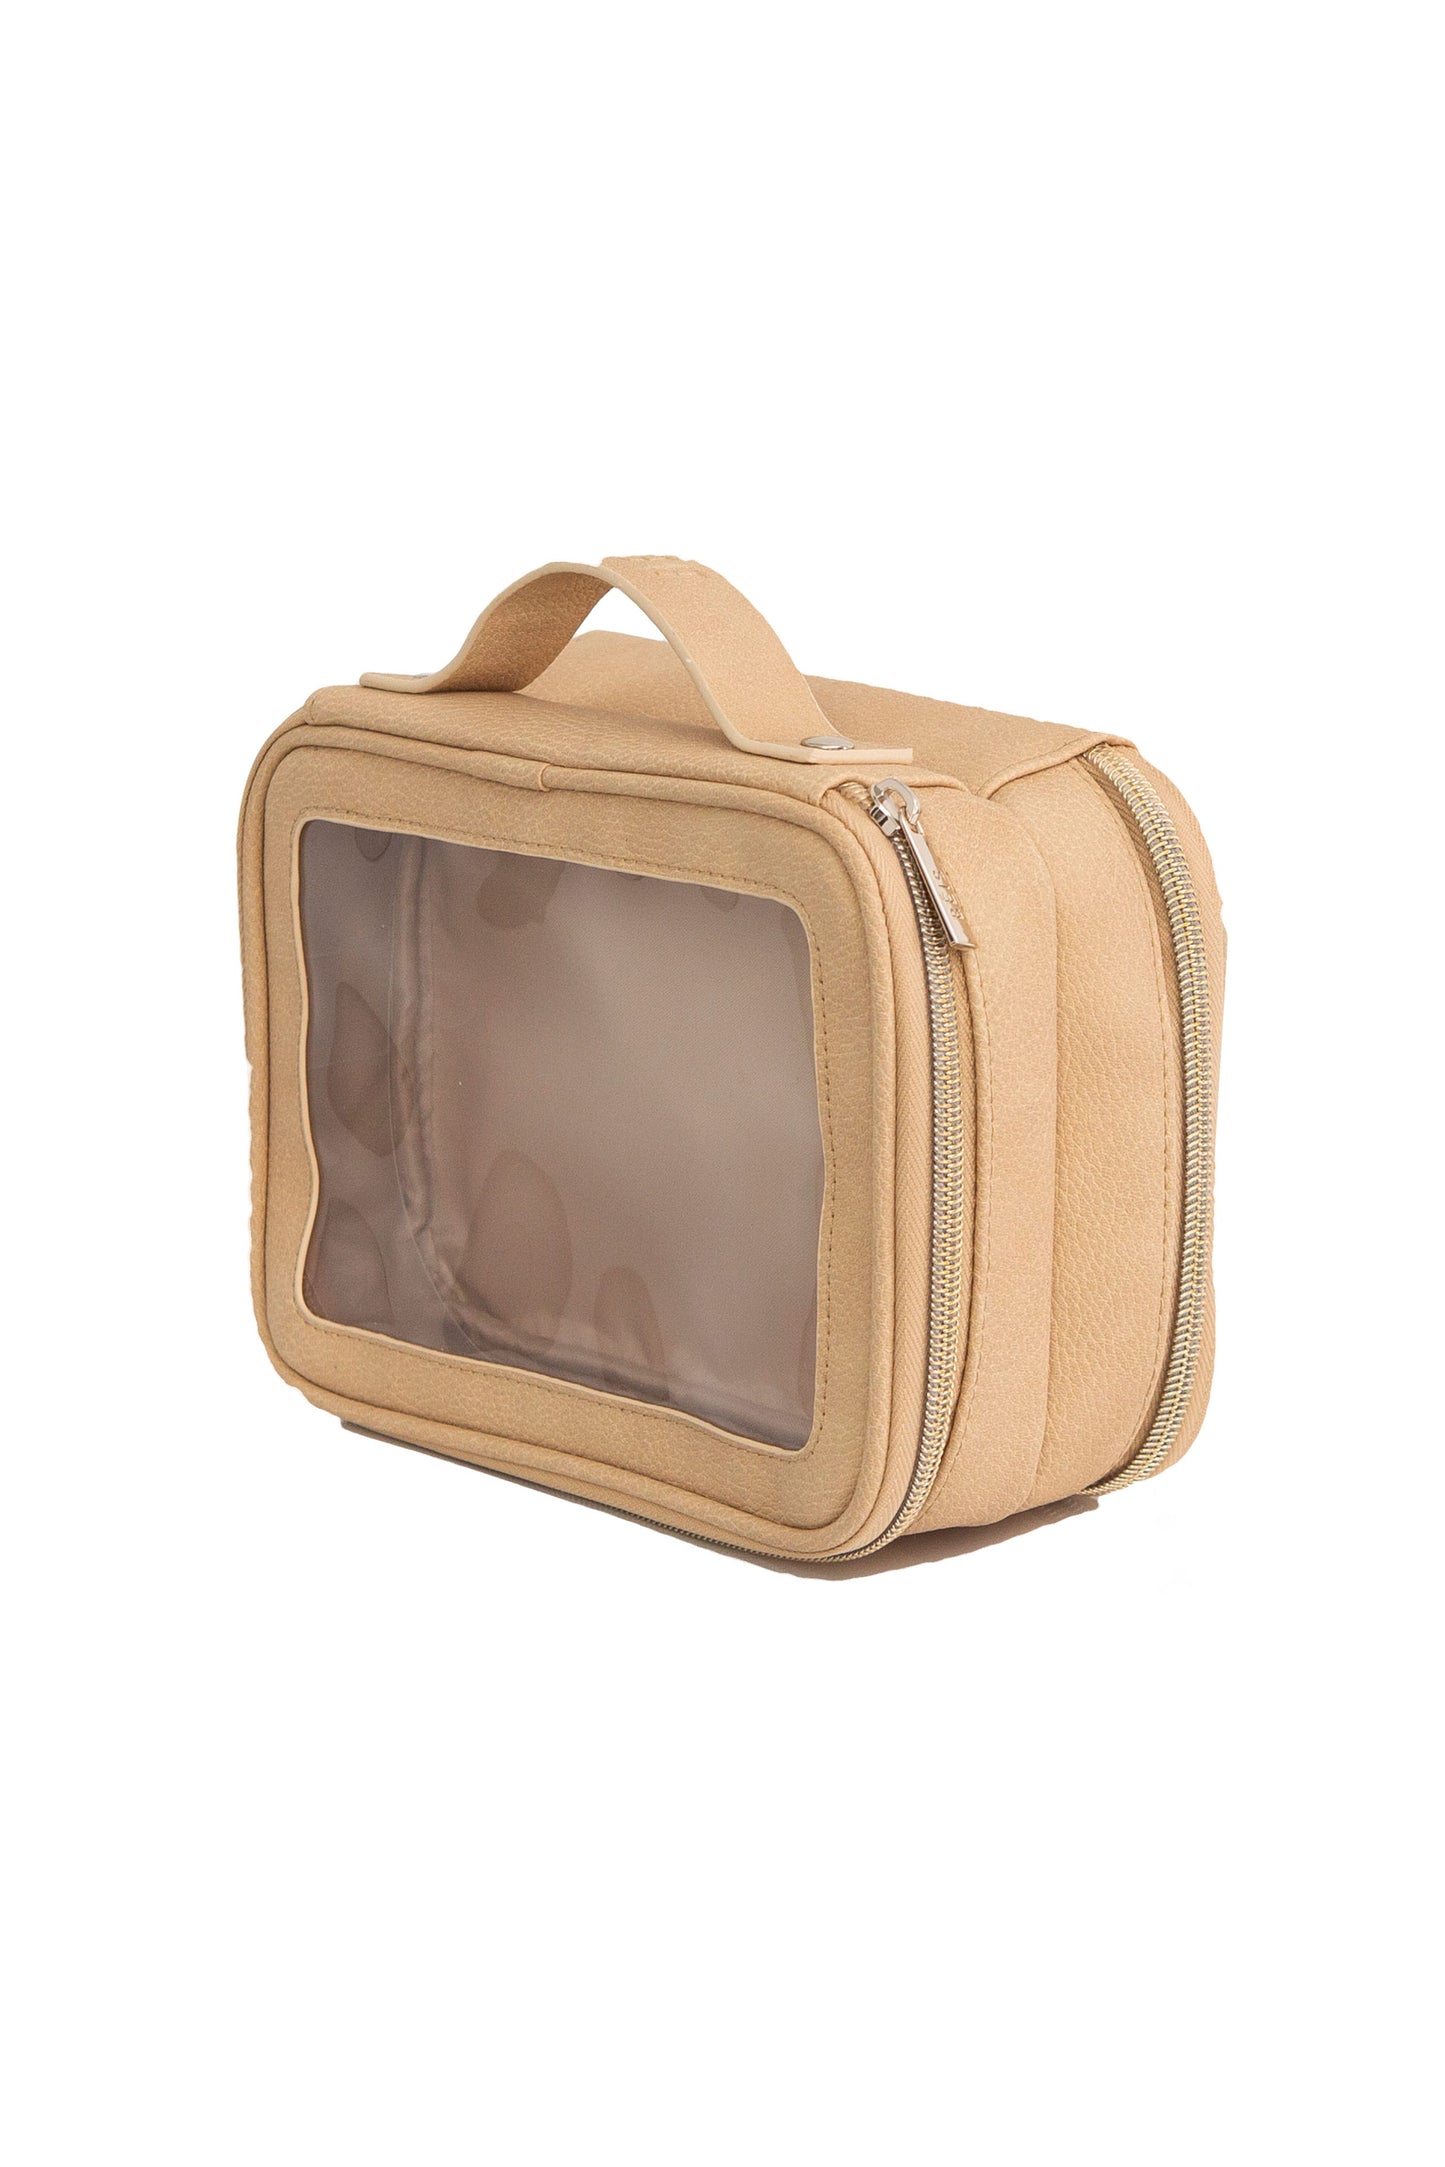 BEIS by Shay Mitchell | The On-The-Go Essential case in Beige (Product Image - side)